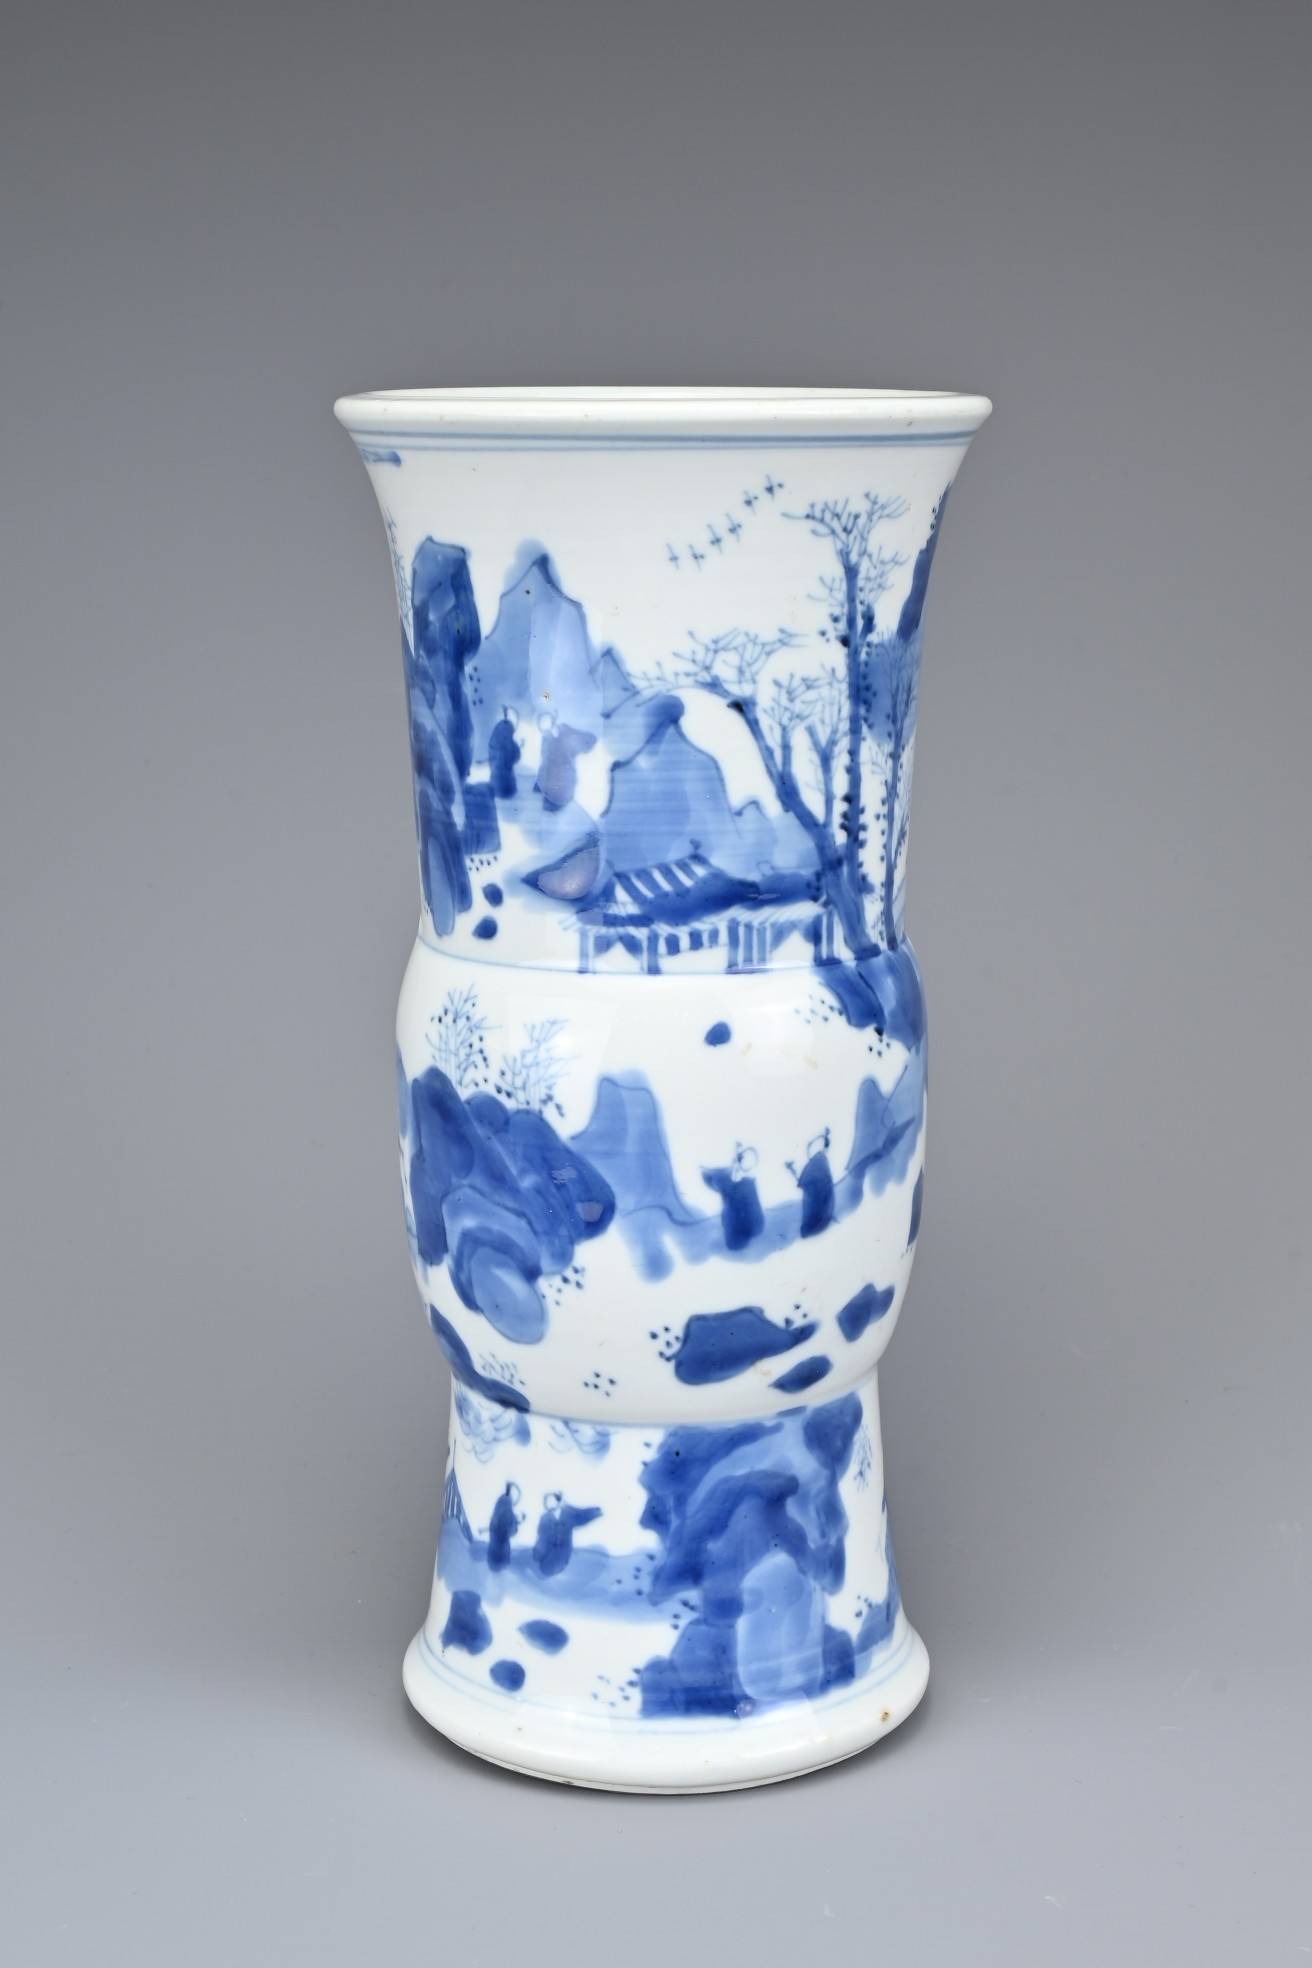 A CHINESE BLUE AND WHITE PORCELAIN GU SHAPED VASE. Fairly thickly potted, decorated with figures and